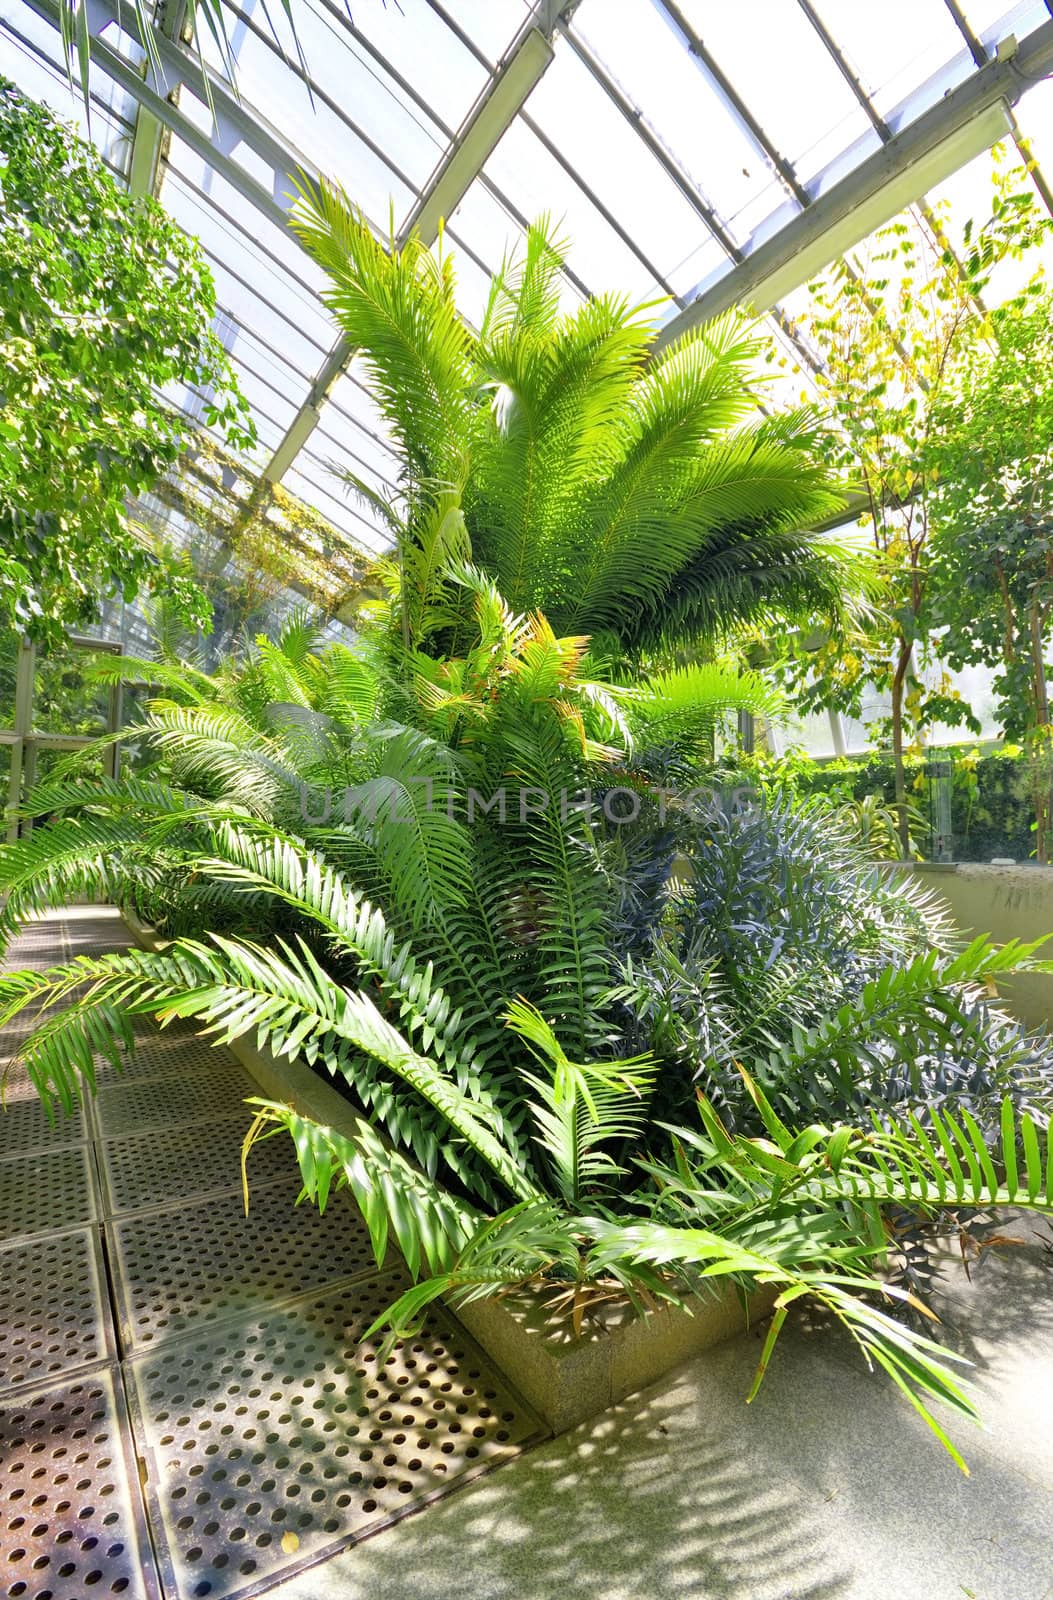 Tropical Plants in a greenhouse at botanic garden, Madrid, Spain. by HERRAEZ